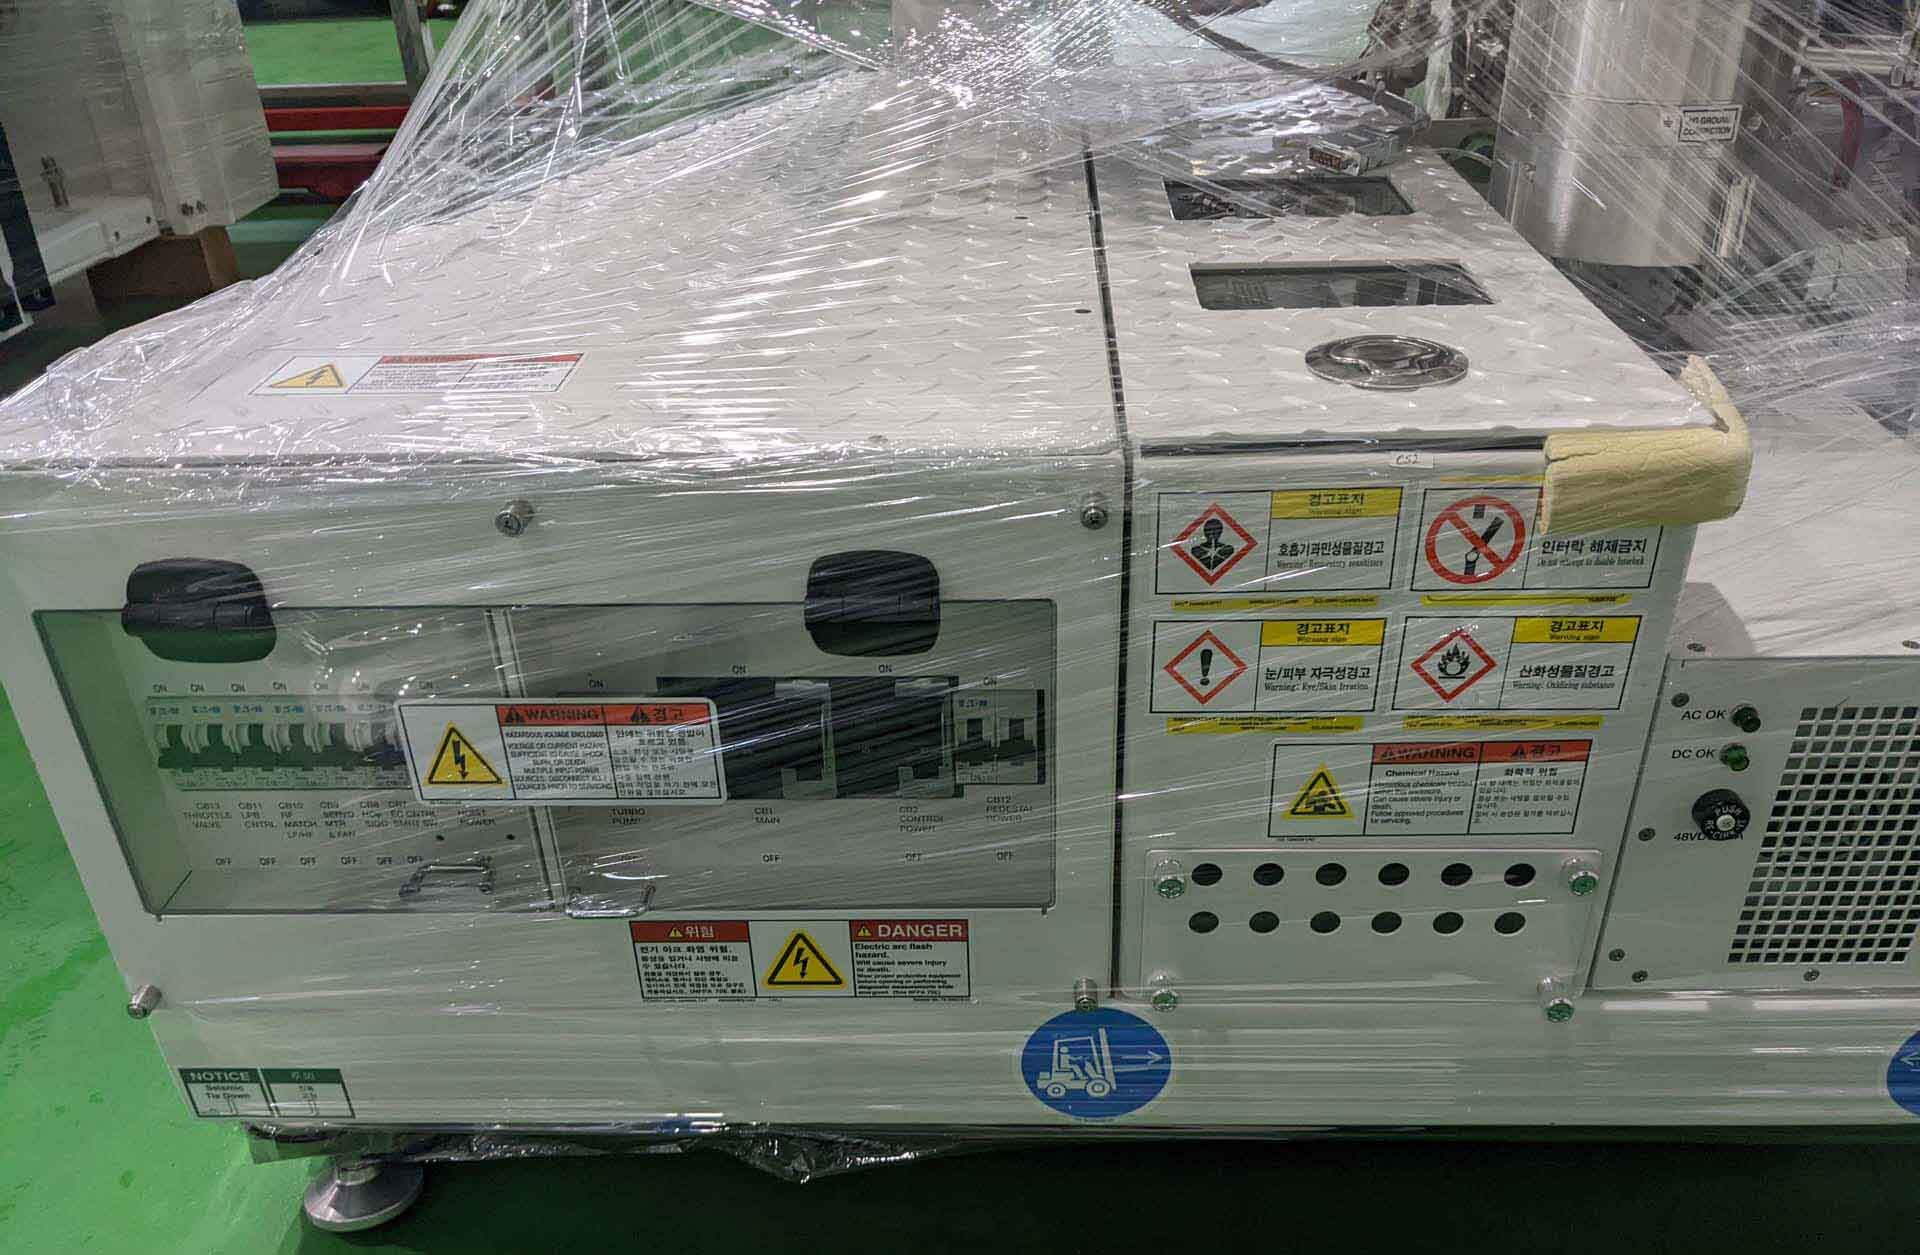 Photo Used LAM RESEARCH C3 Altus Ice Mod For Sale